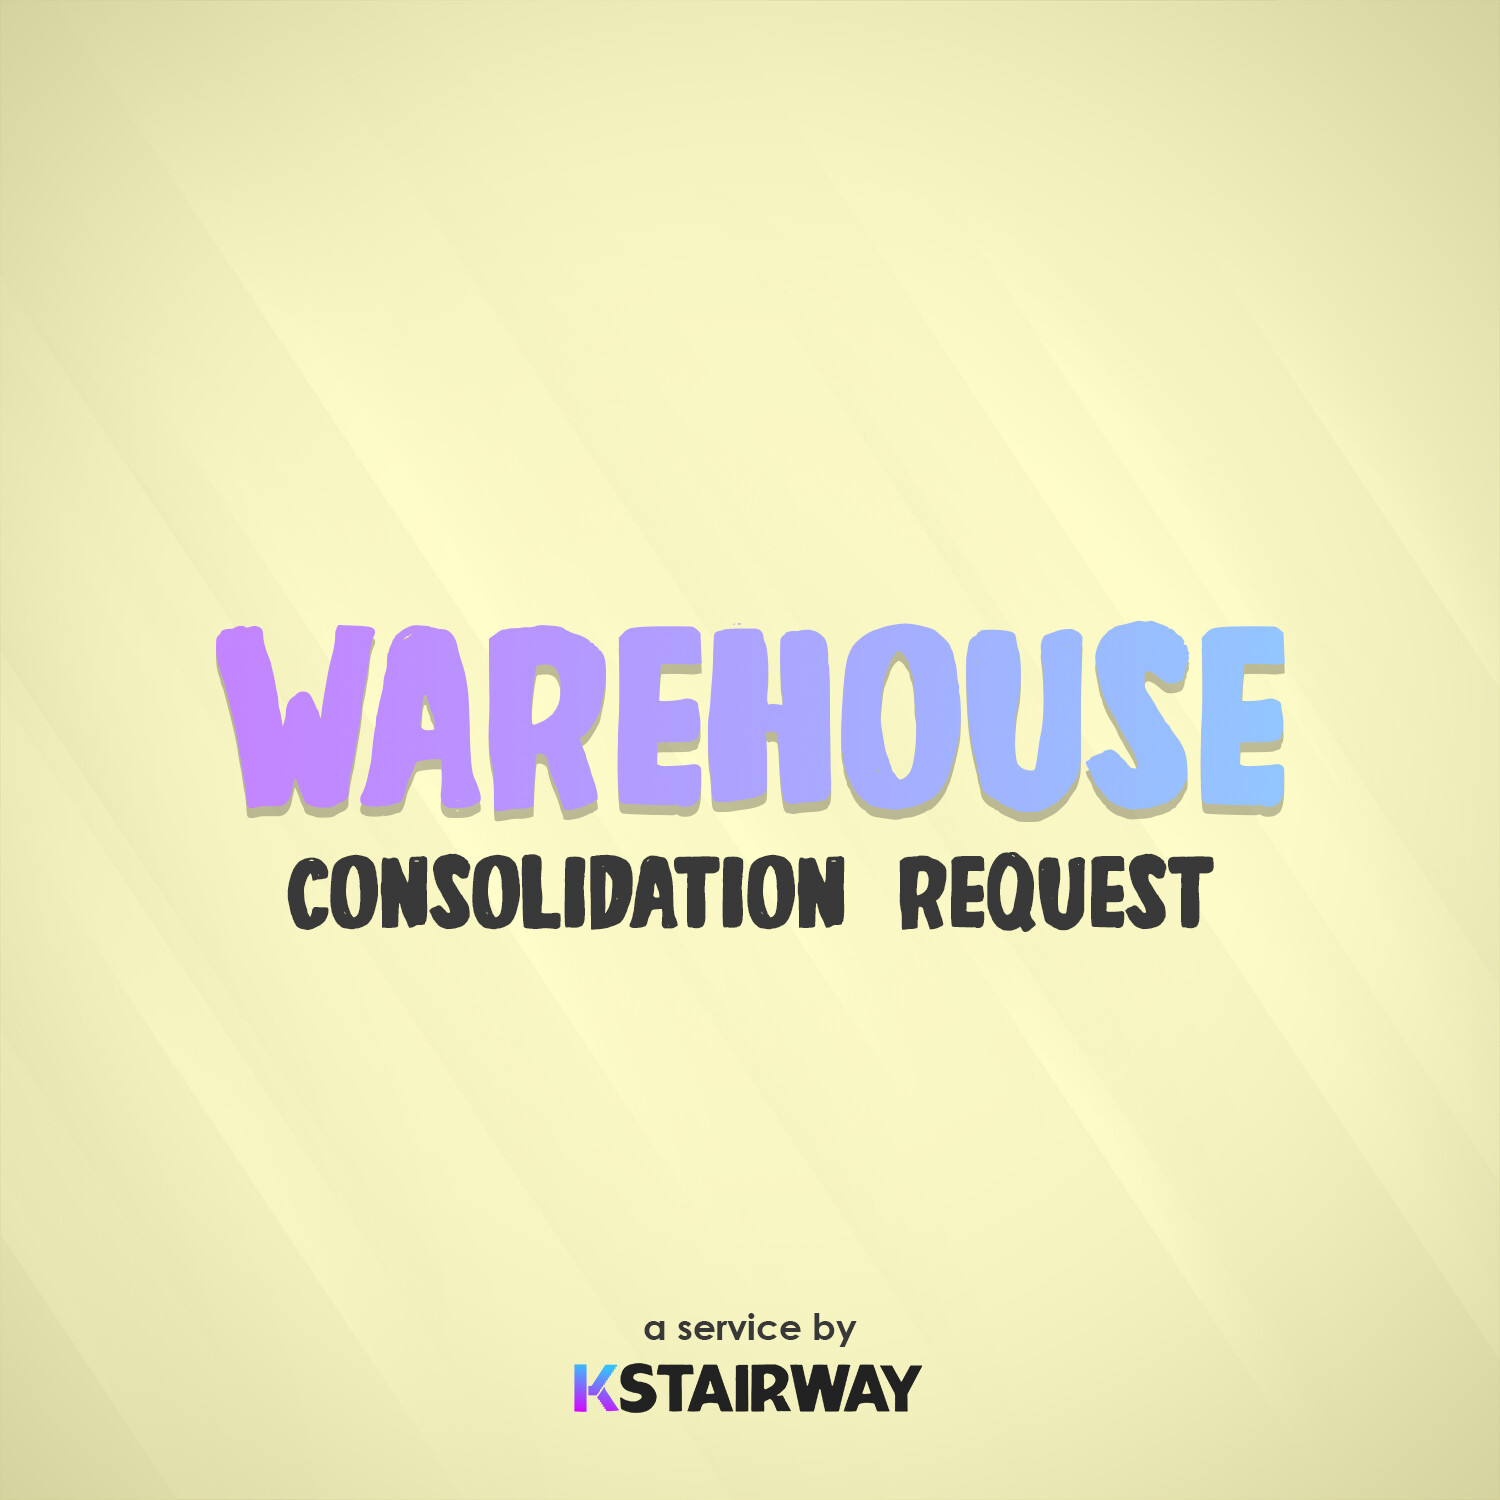 Warehouse Service - Consolidation Request